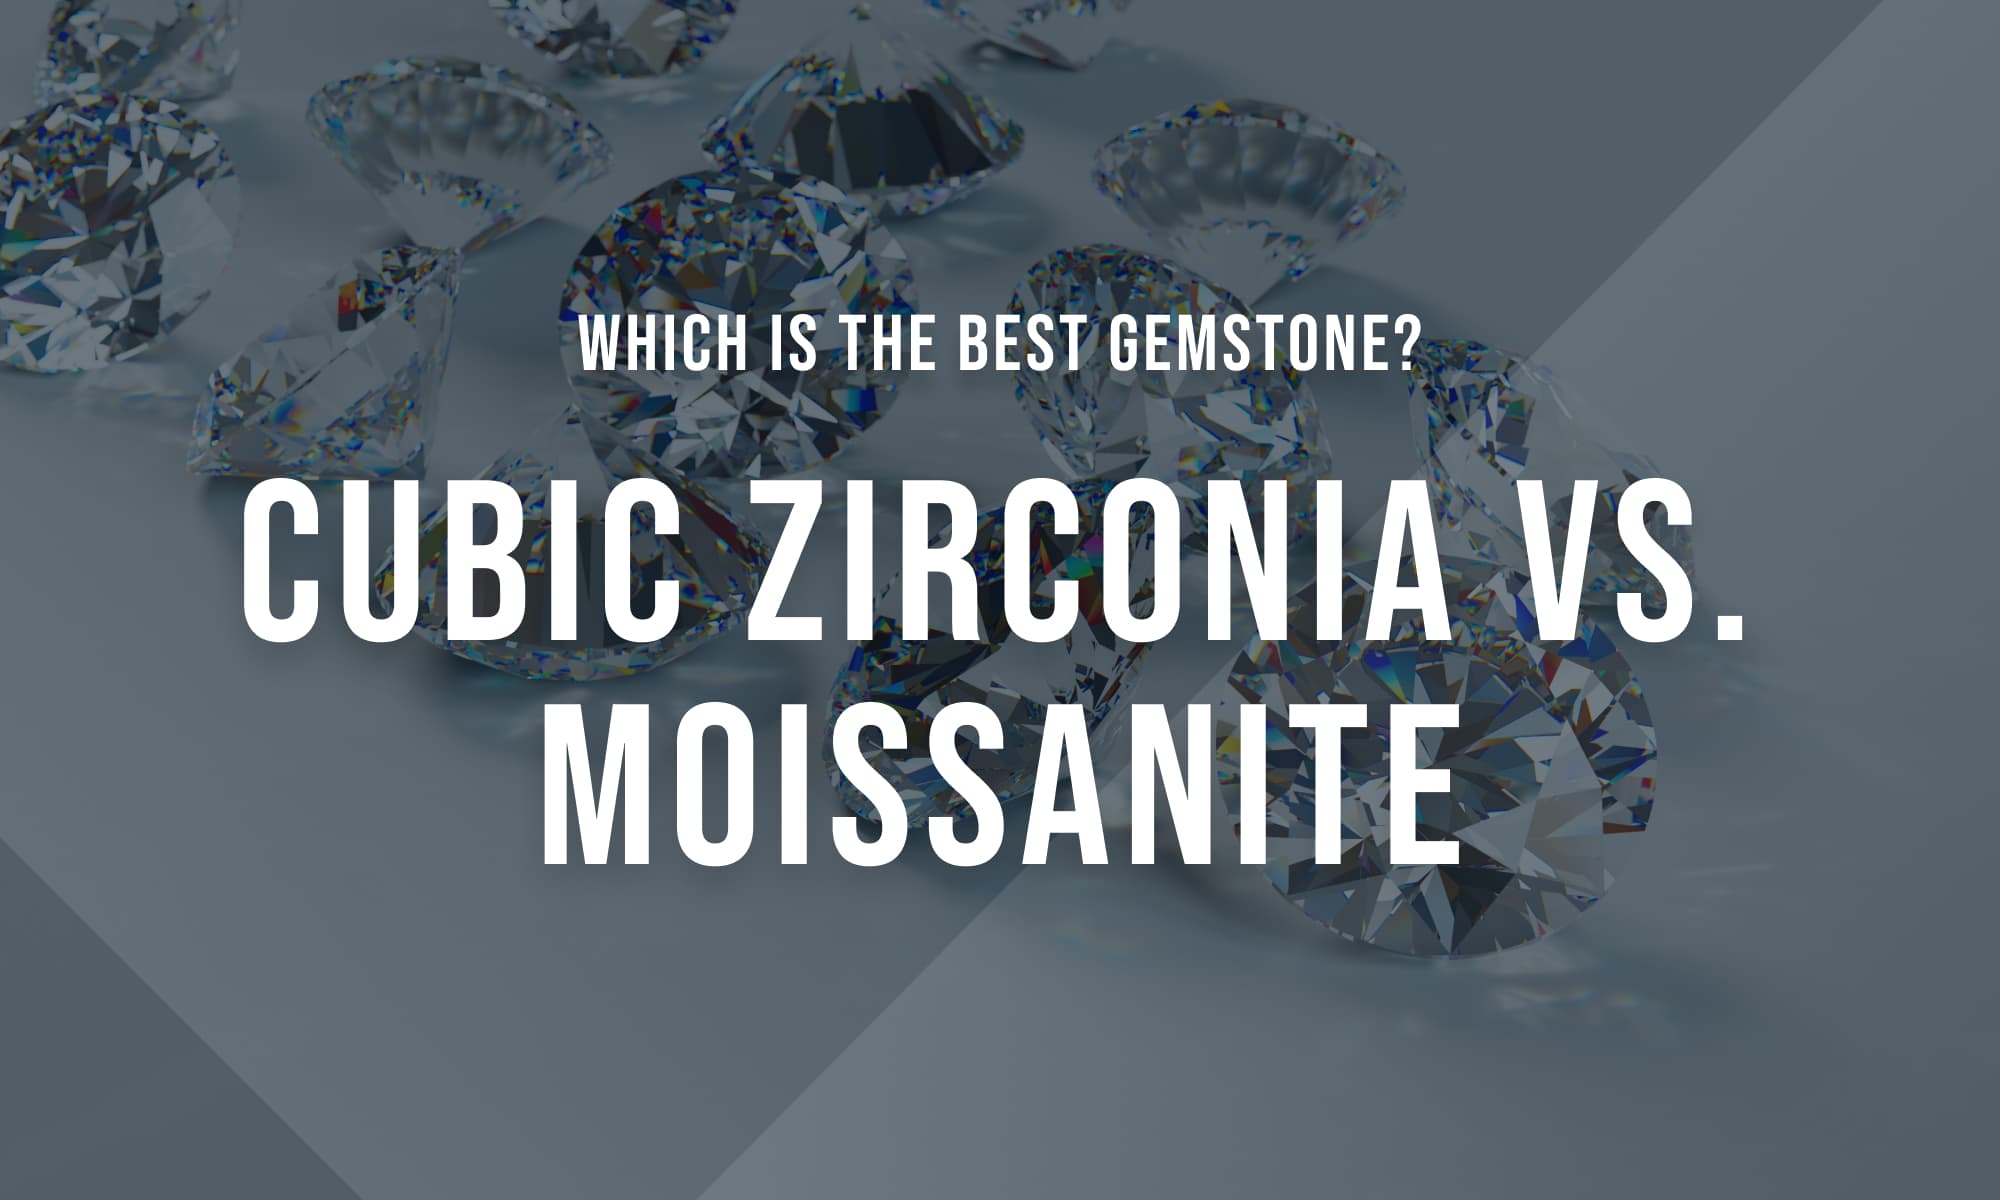 What is better, Moissanite or Cubic Zirconia?